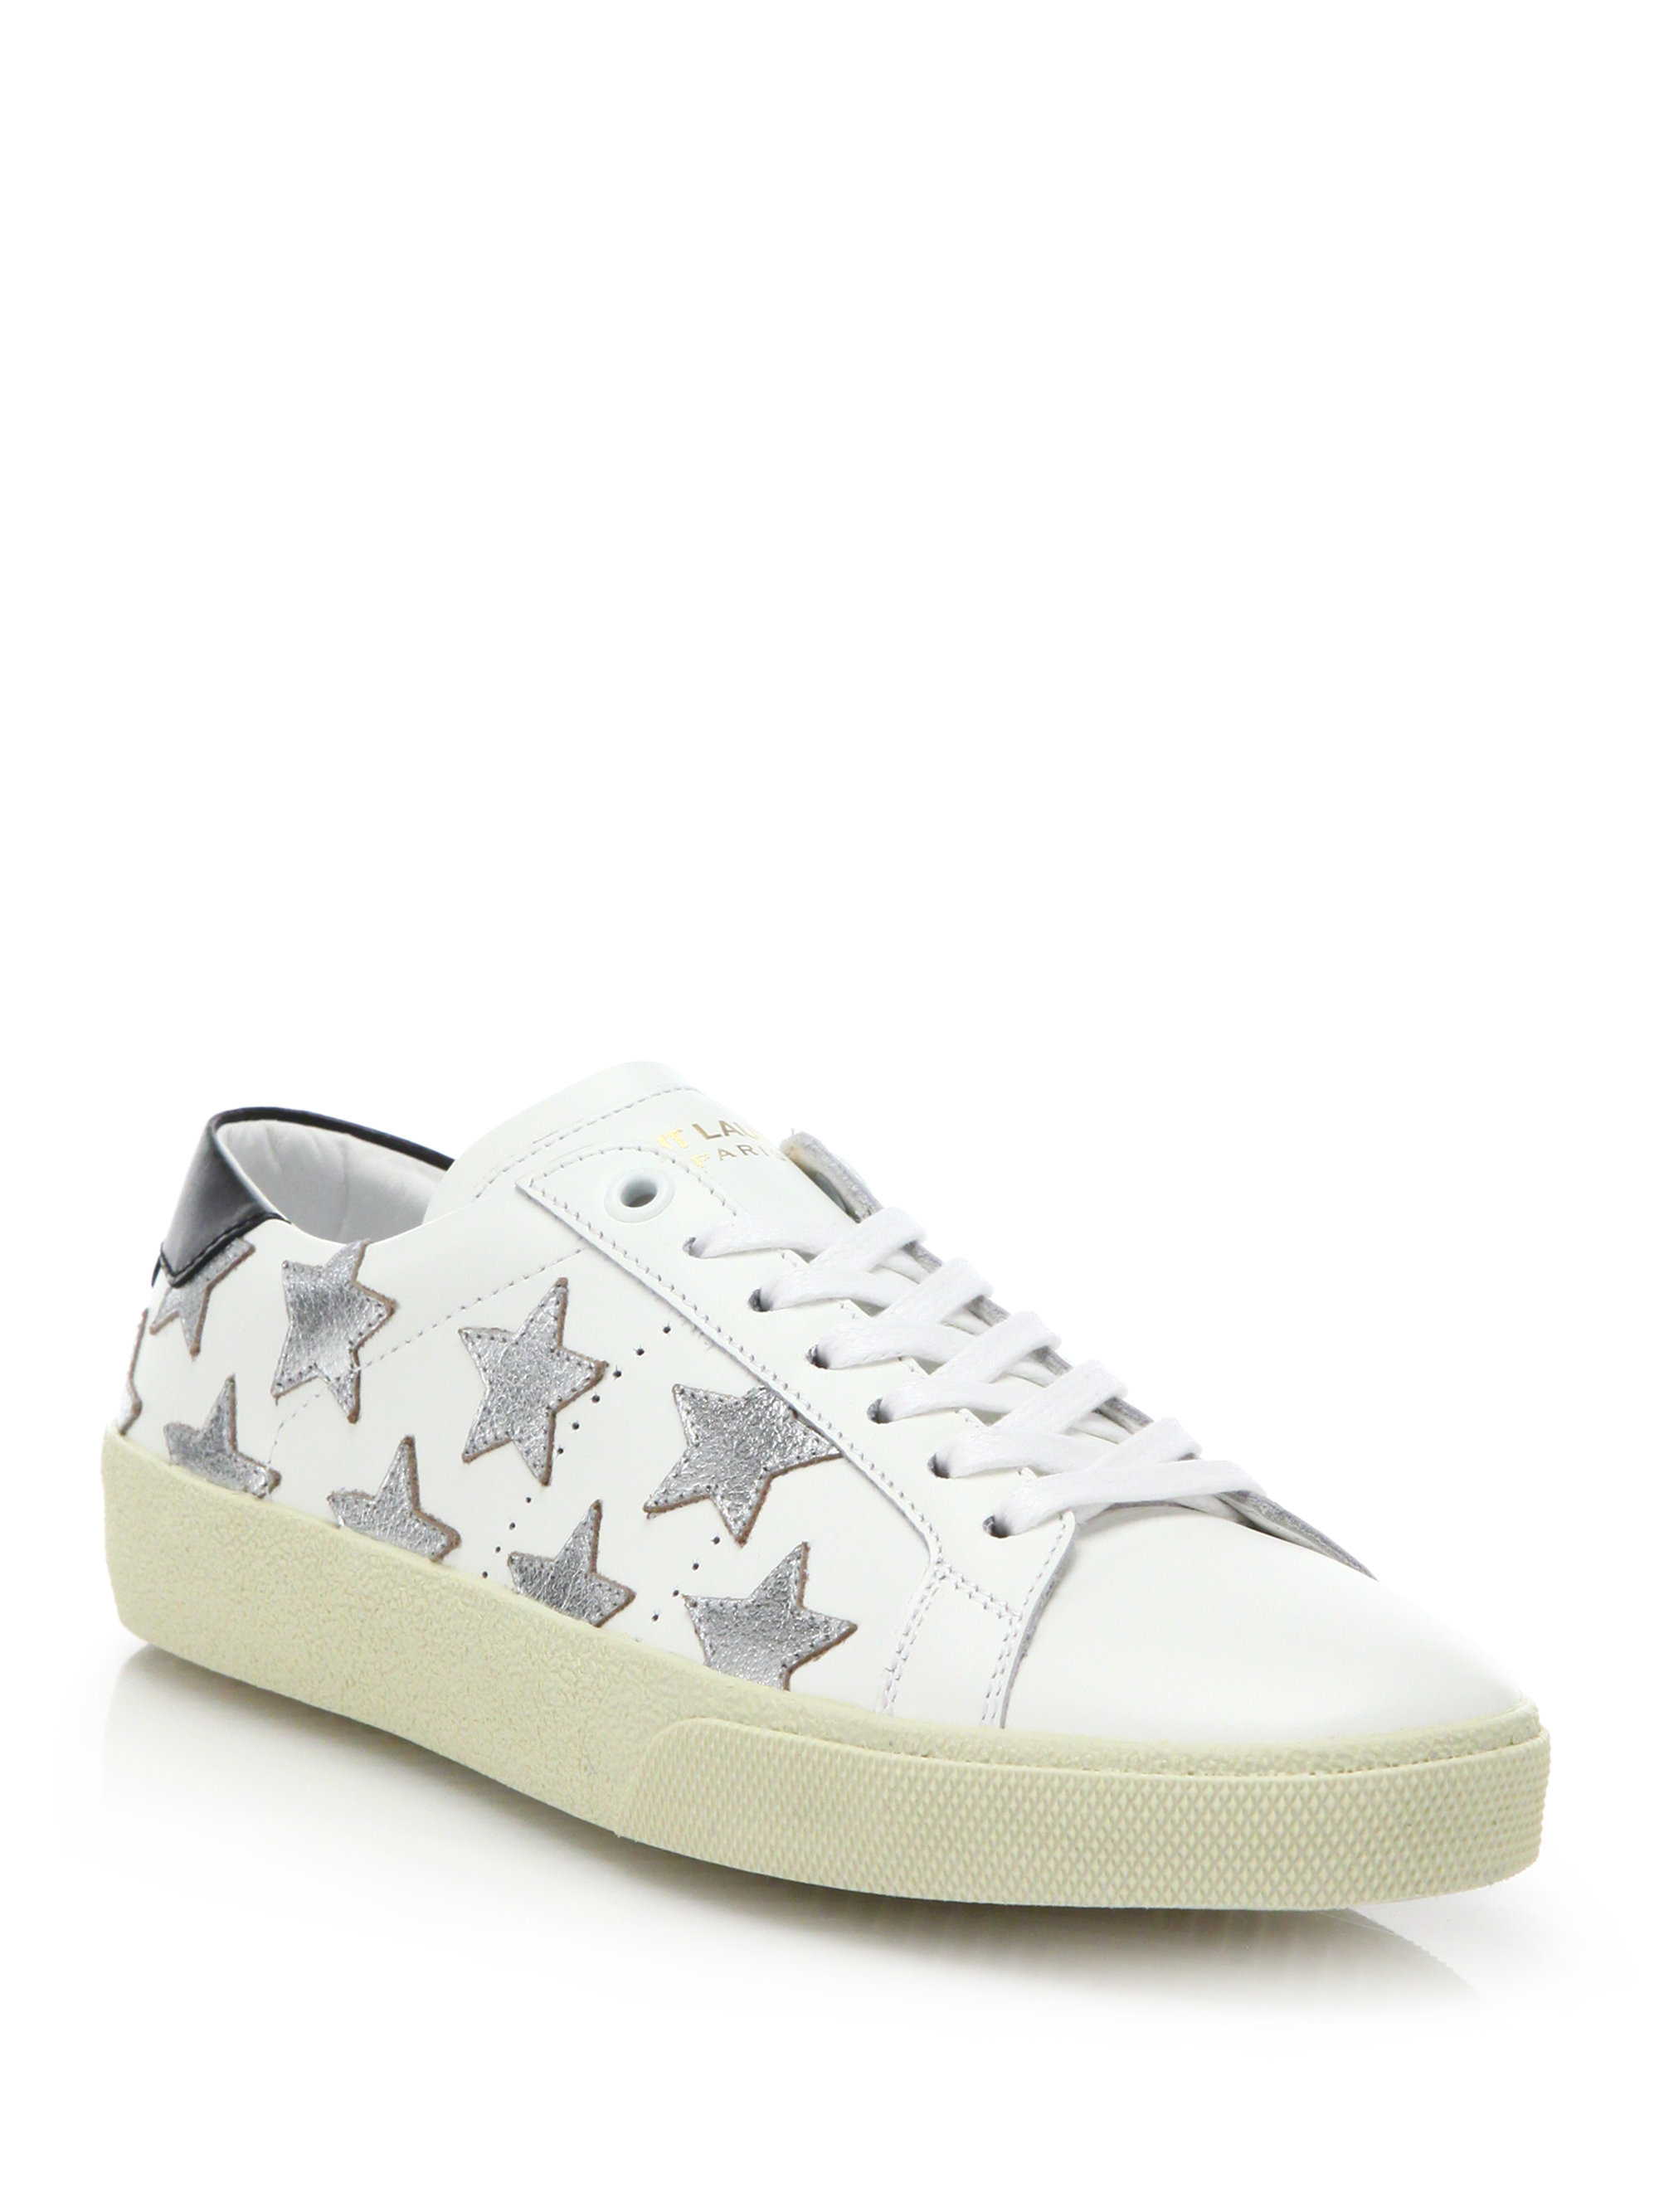 Saint laurent Court Classic Leather Metallic Star Sneakers in White